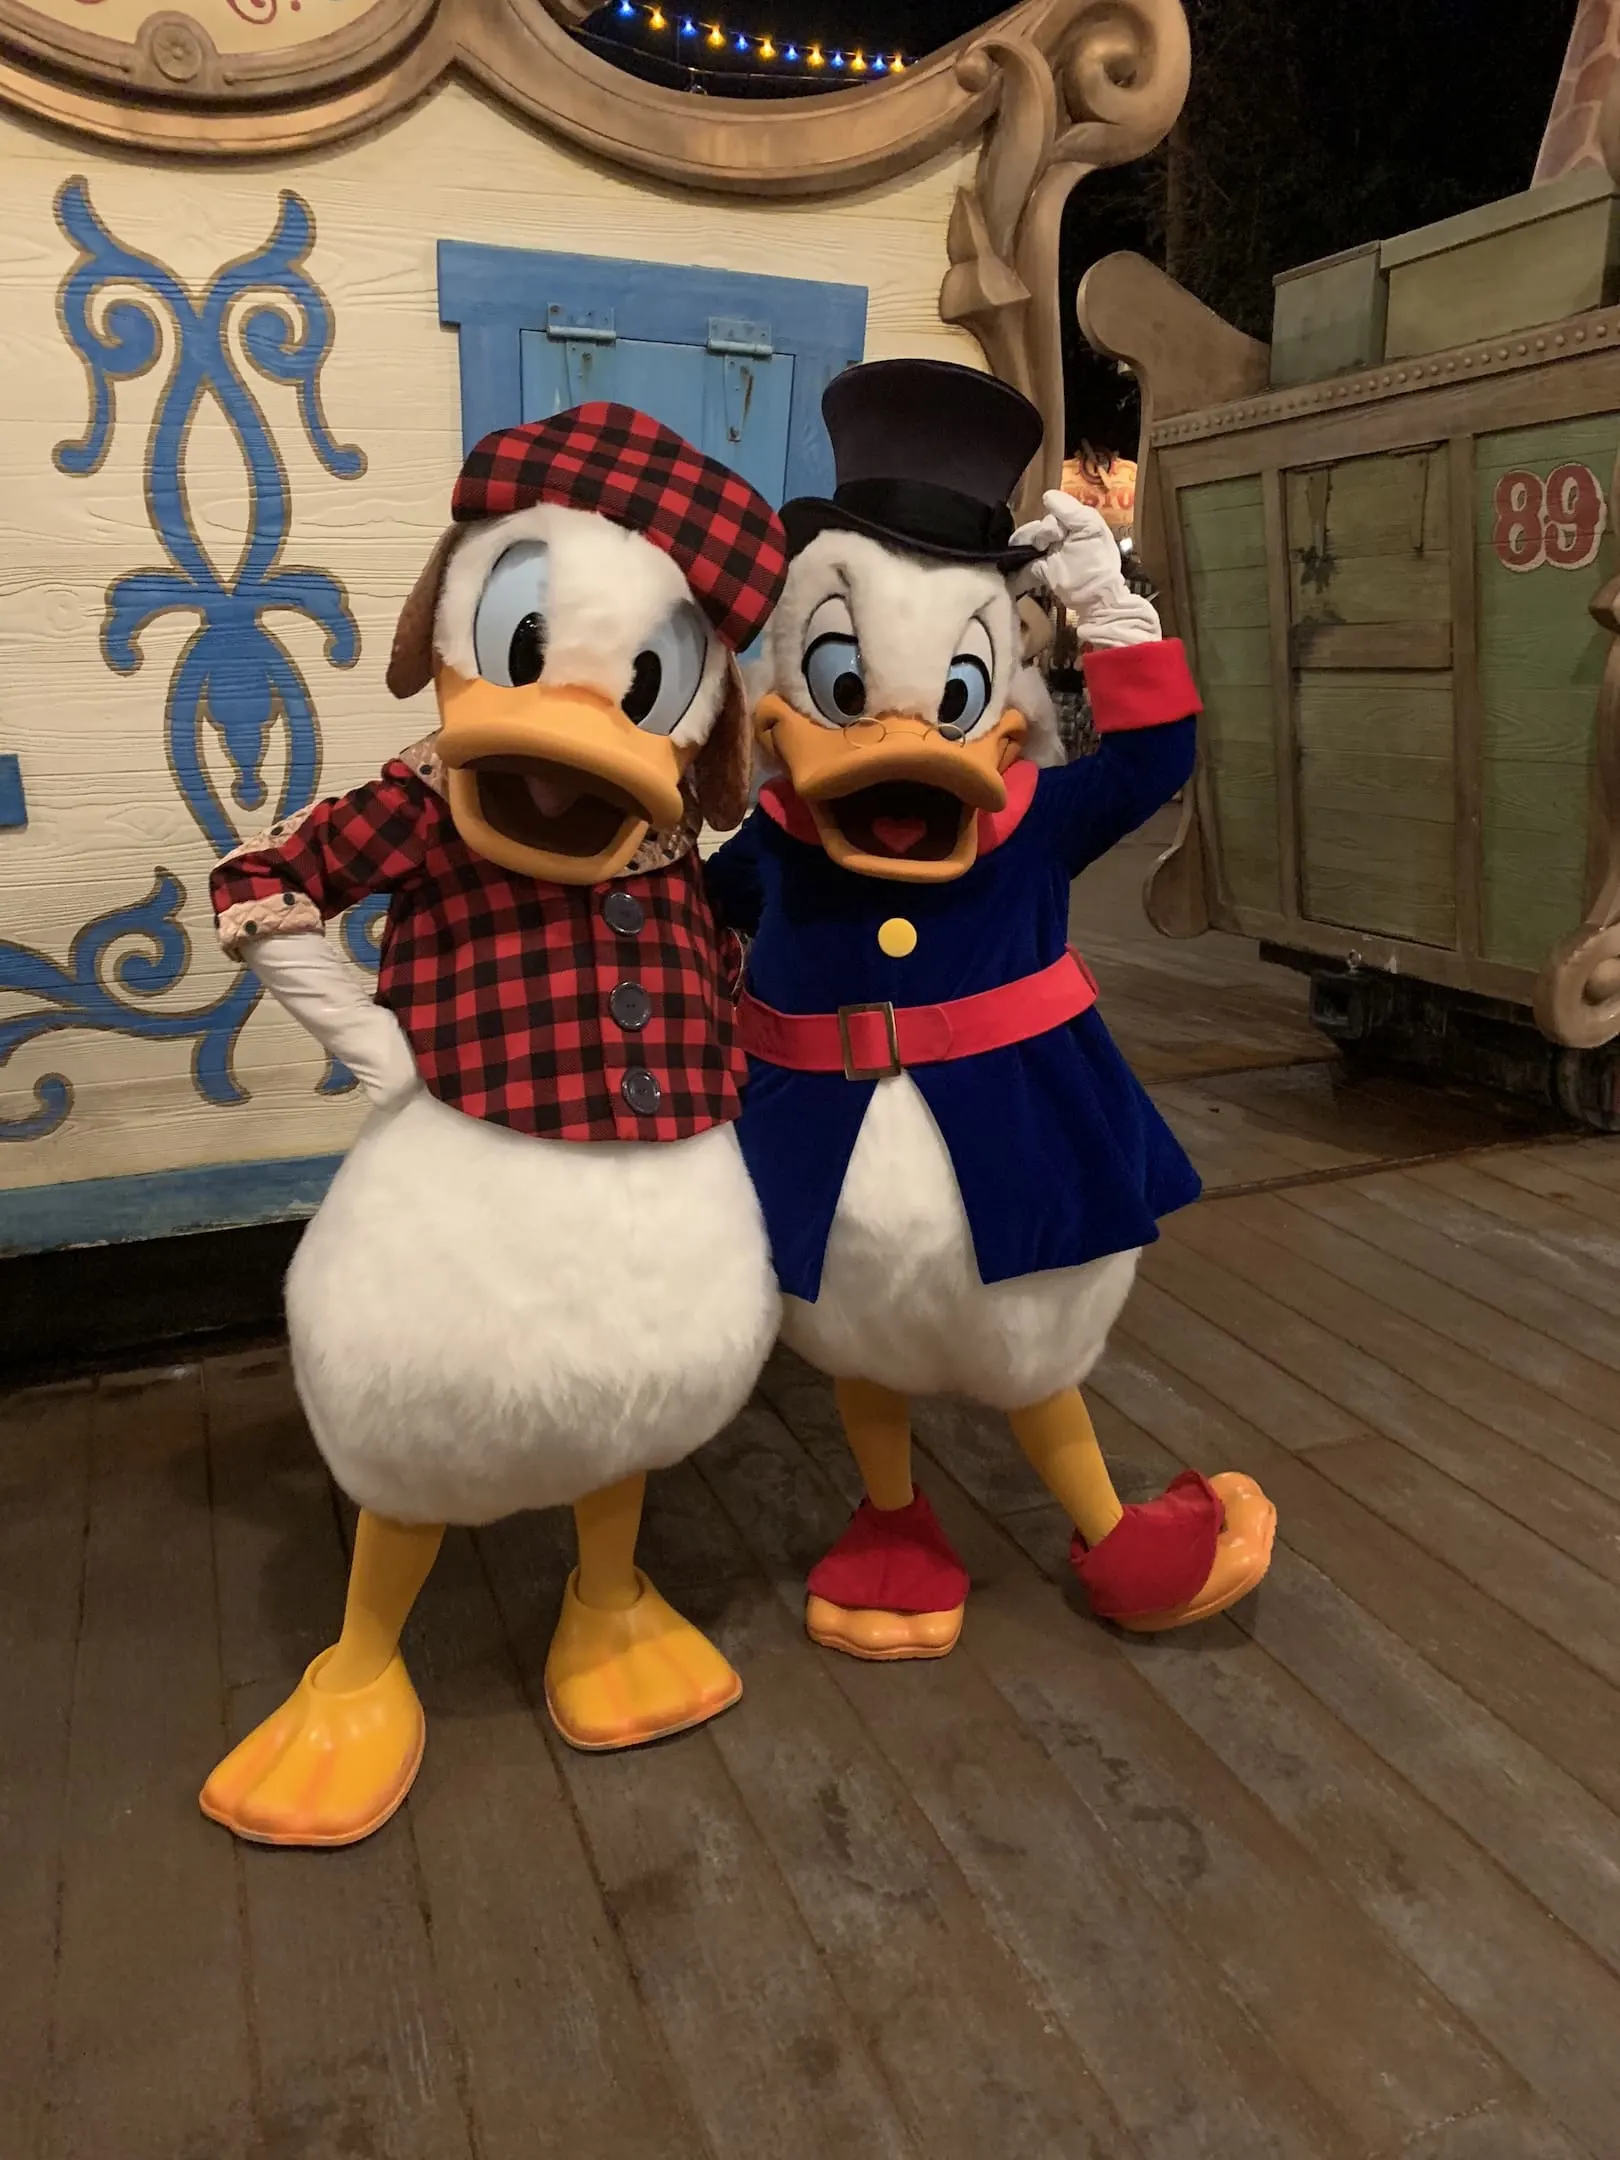 Donald and Scrooge McDuck Mickey's Very Merry Christmas Party Magic Kingdom